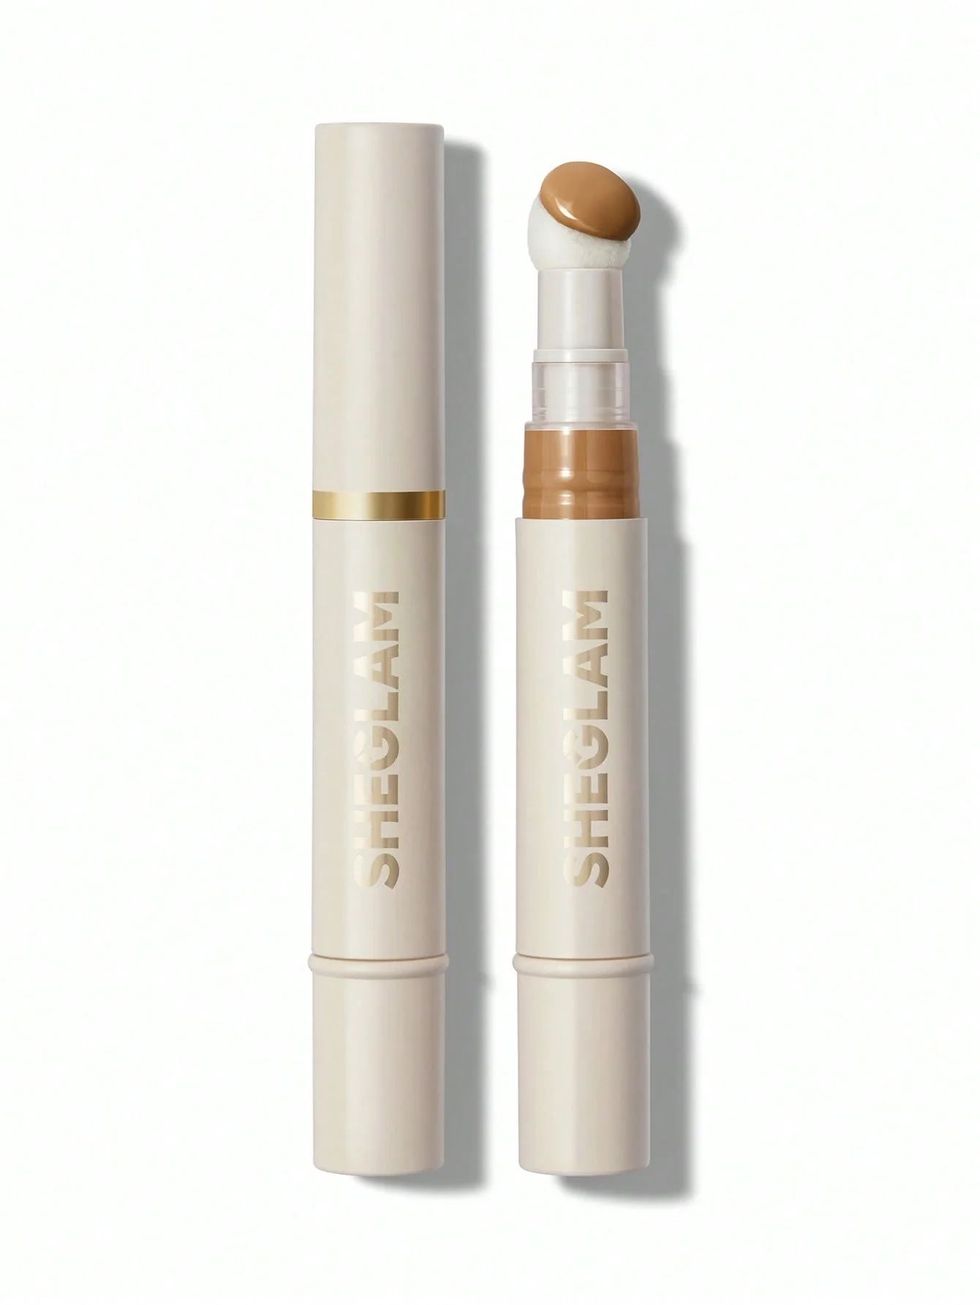 Complexion Boost Concealer in Caramel